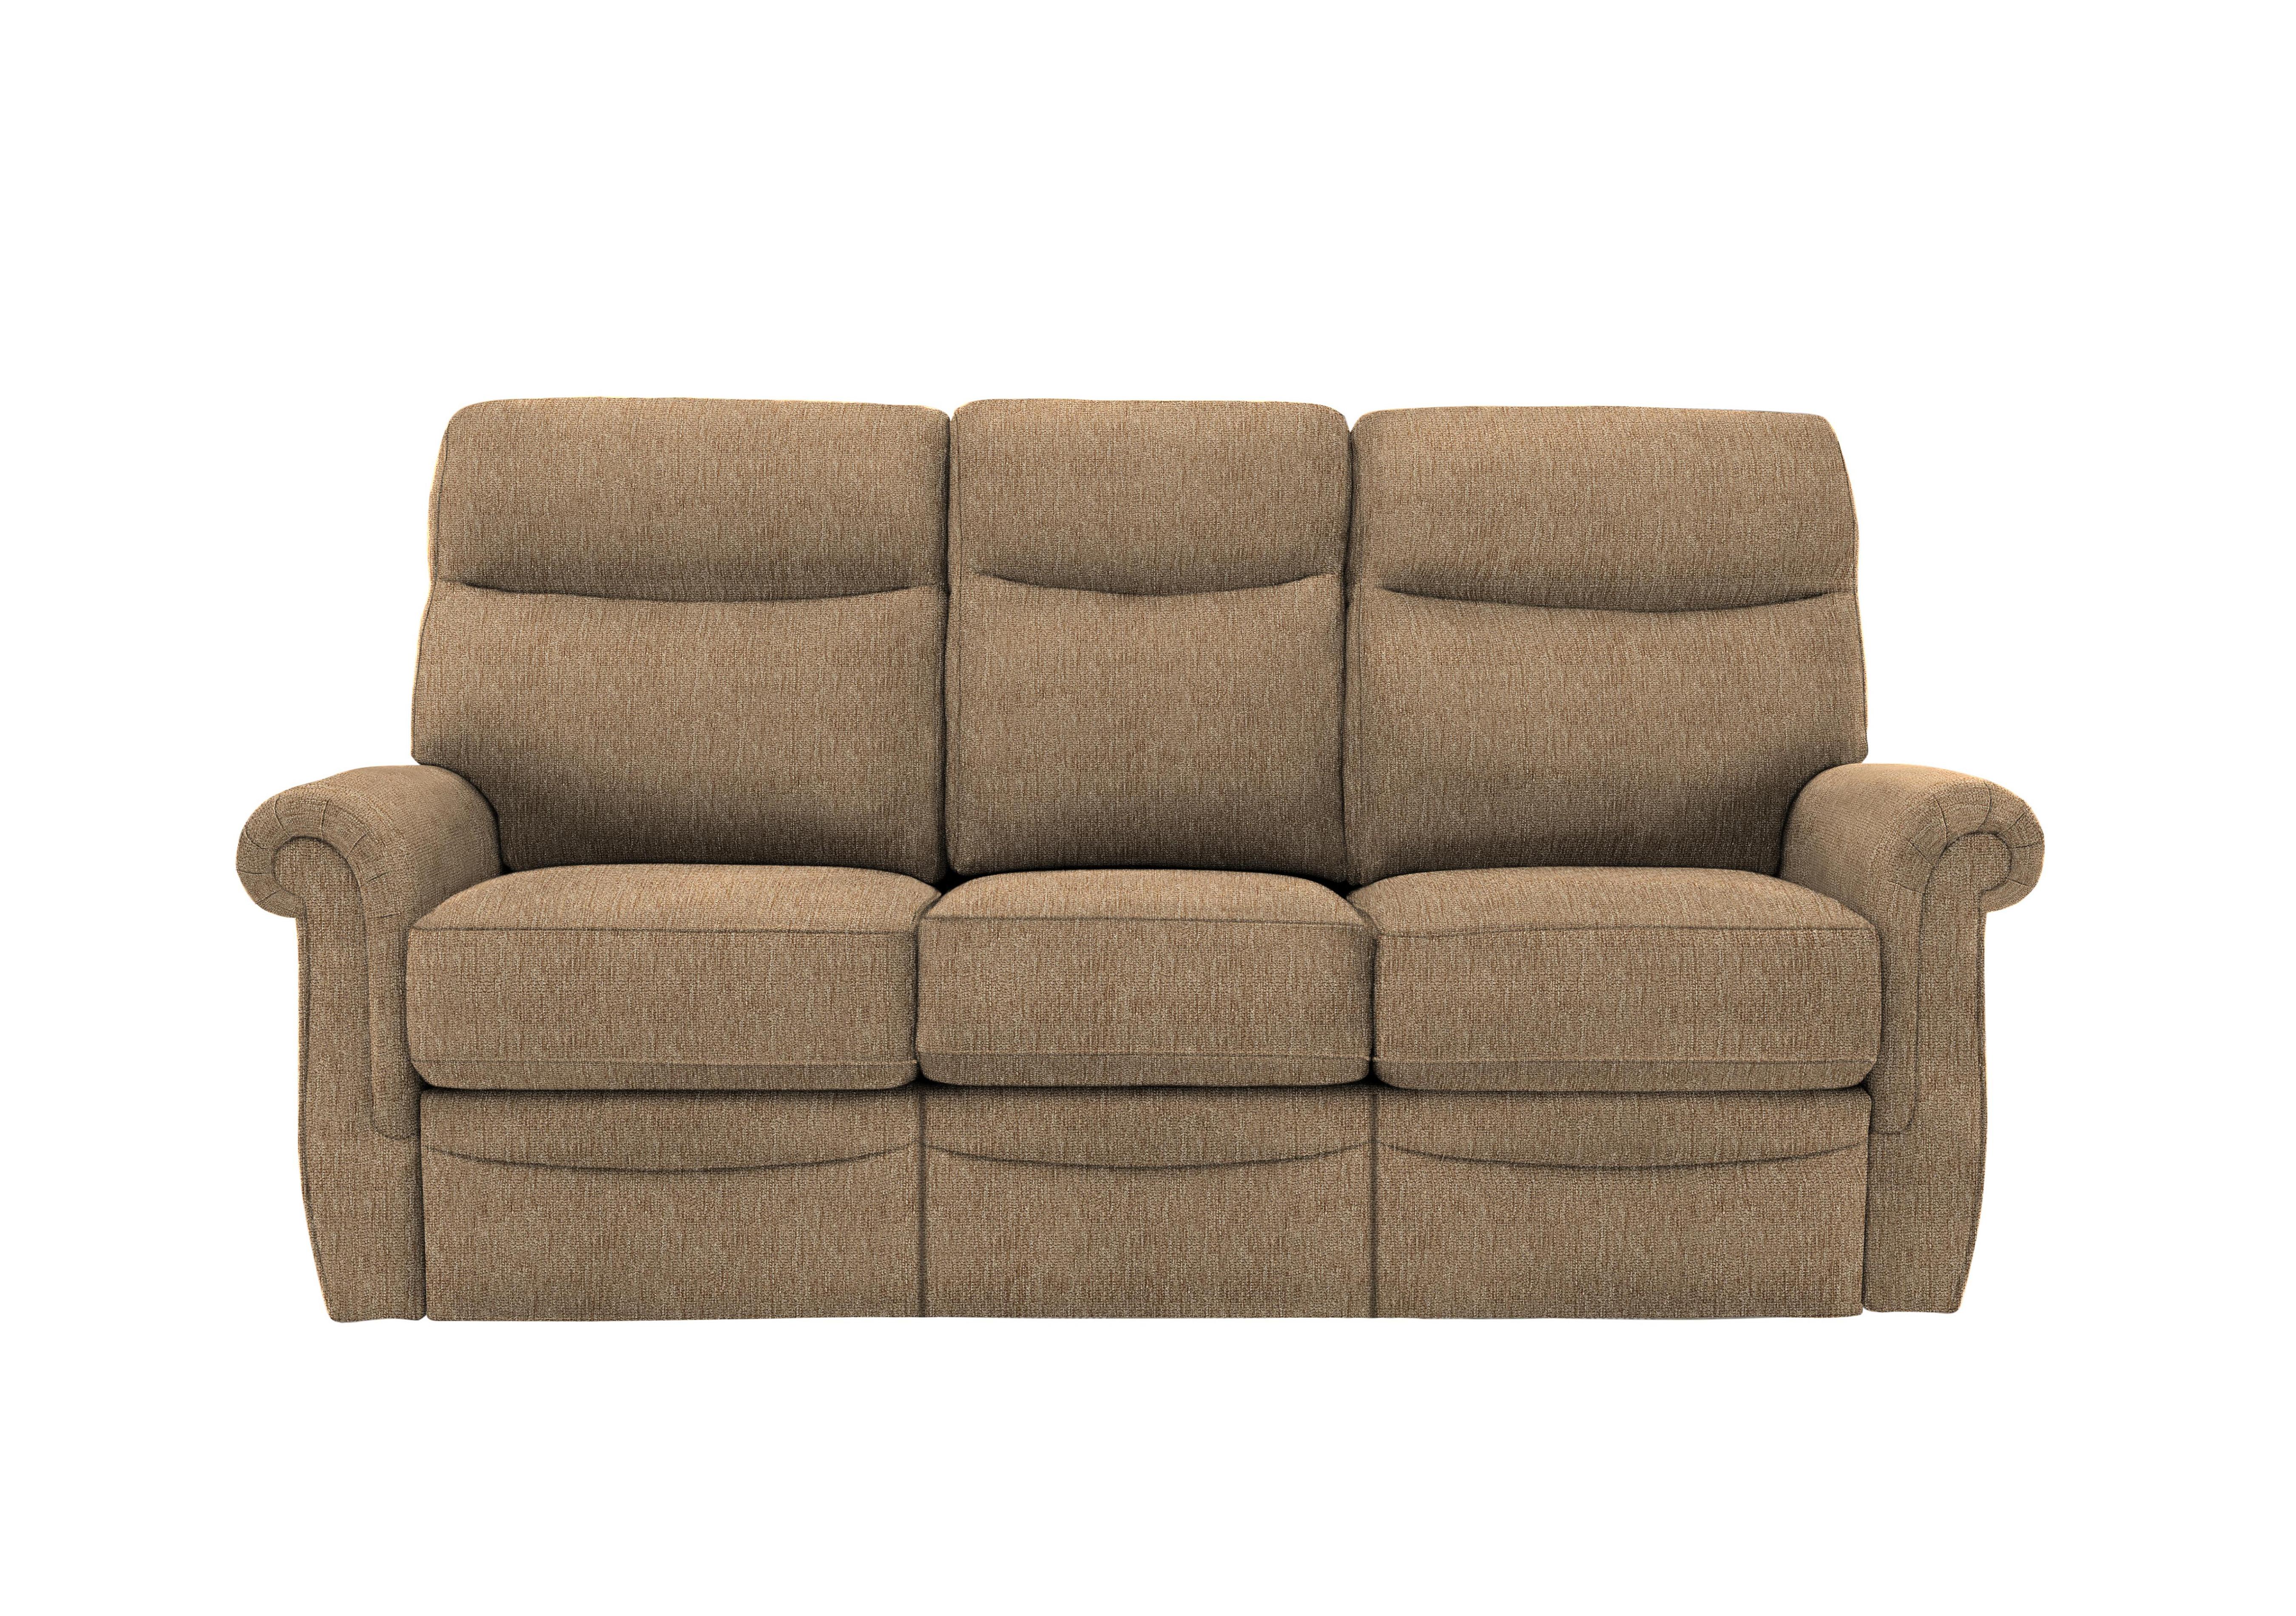 Avon 3 Seater Fabric Sofa in A070 Boucle Cocoa on Furniture Village